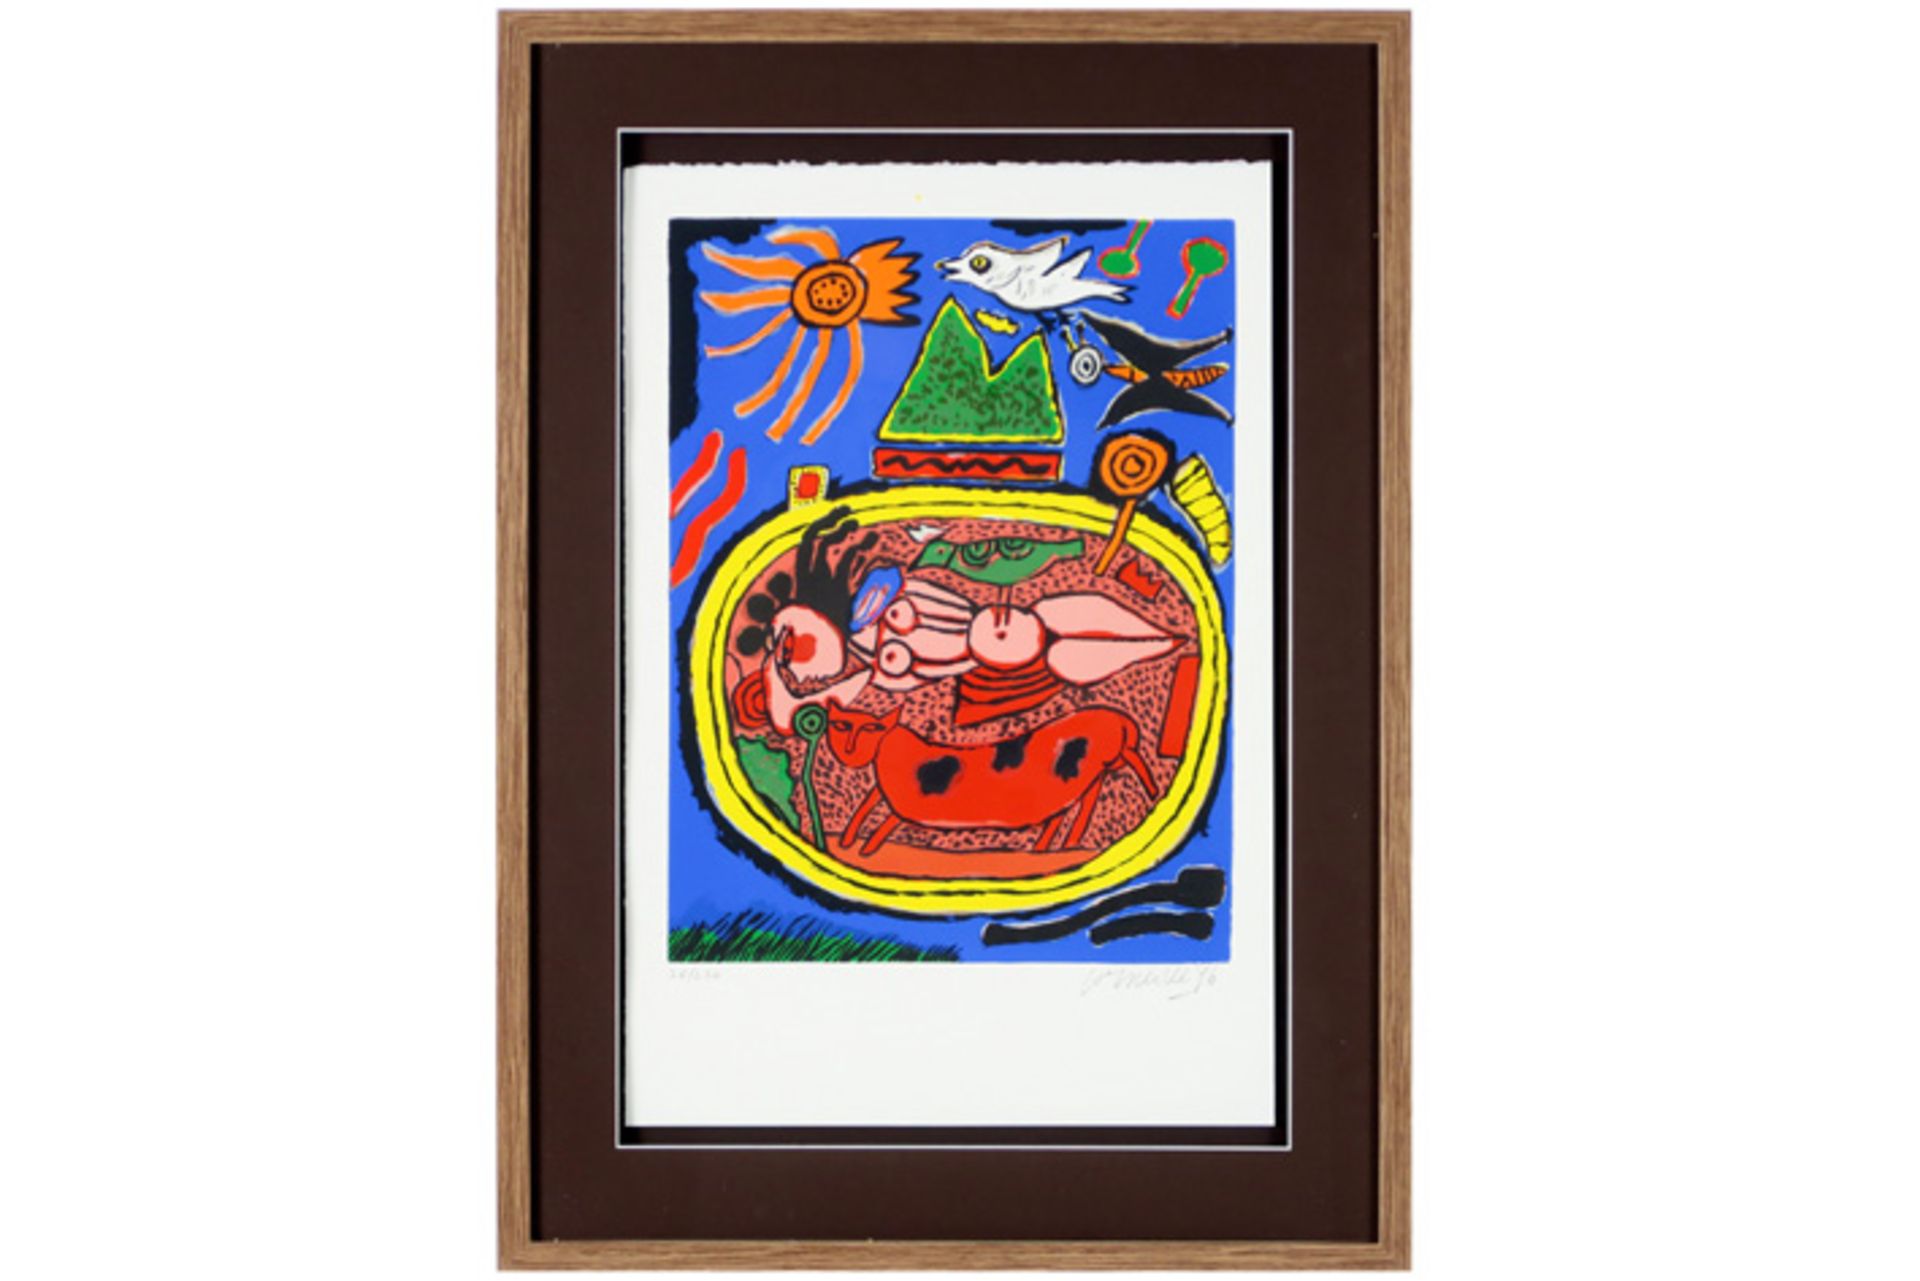 typical Corneille screenprint in colors - signed and dated 1996 CORNEILLE (1922 - 2010) (1922 -